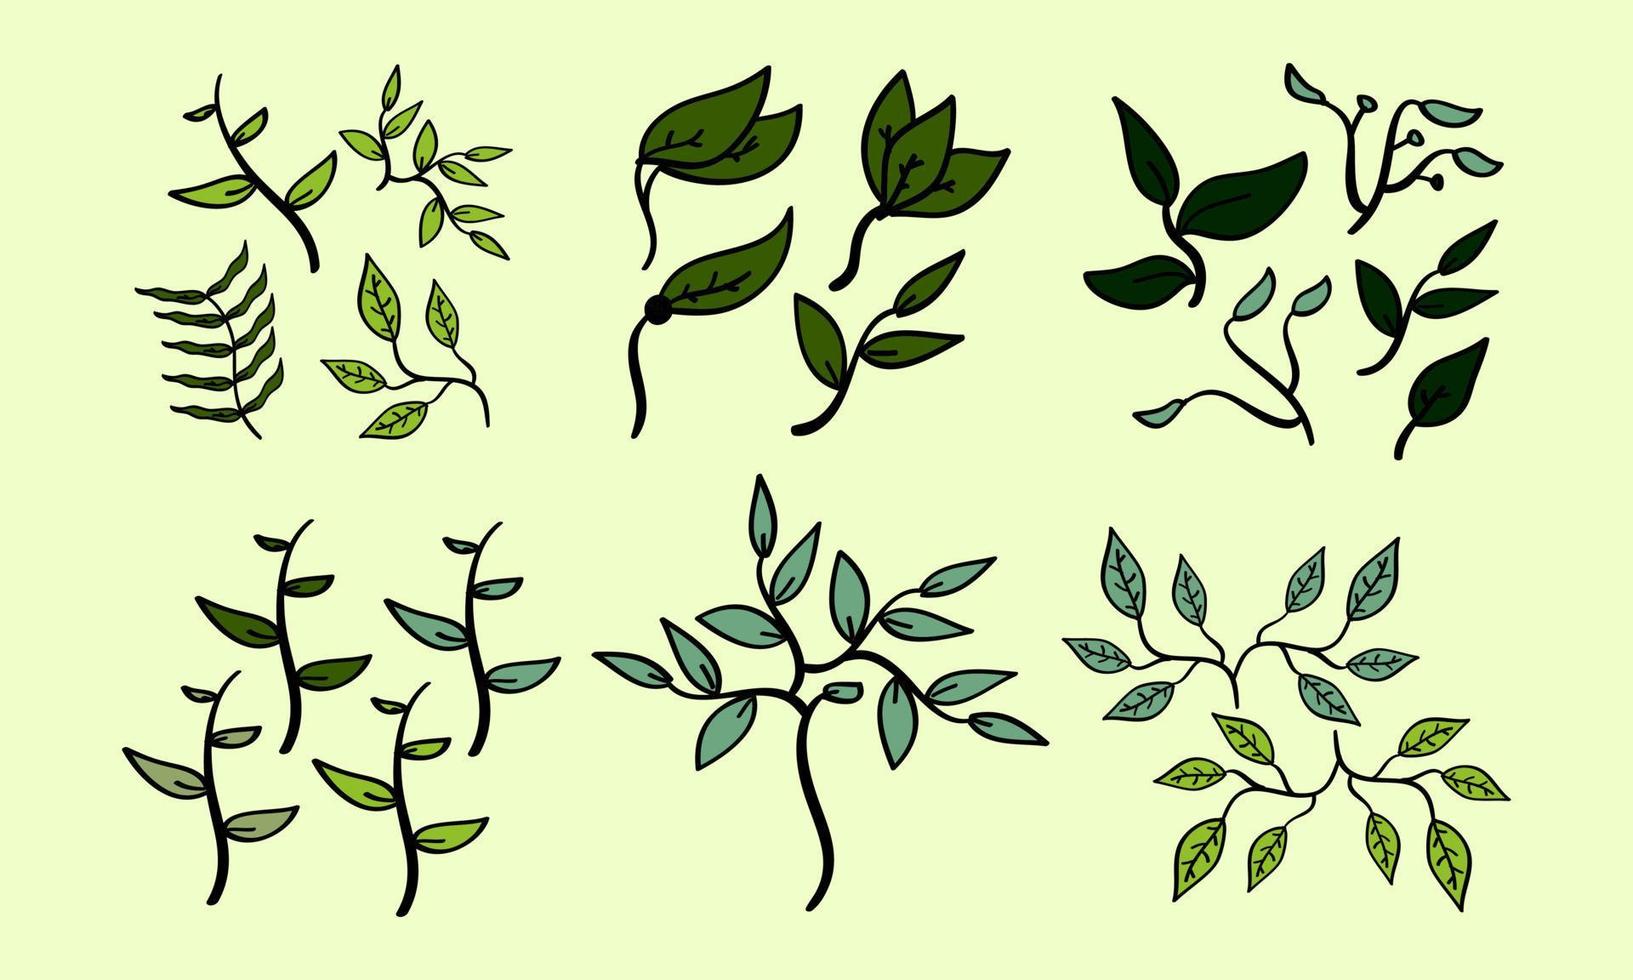 Hand drawn leaf illustration in doodle style vector